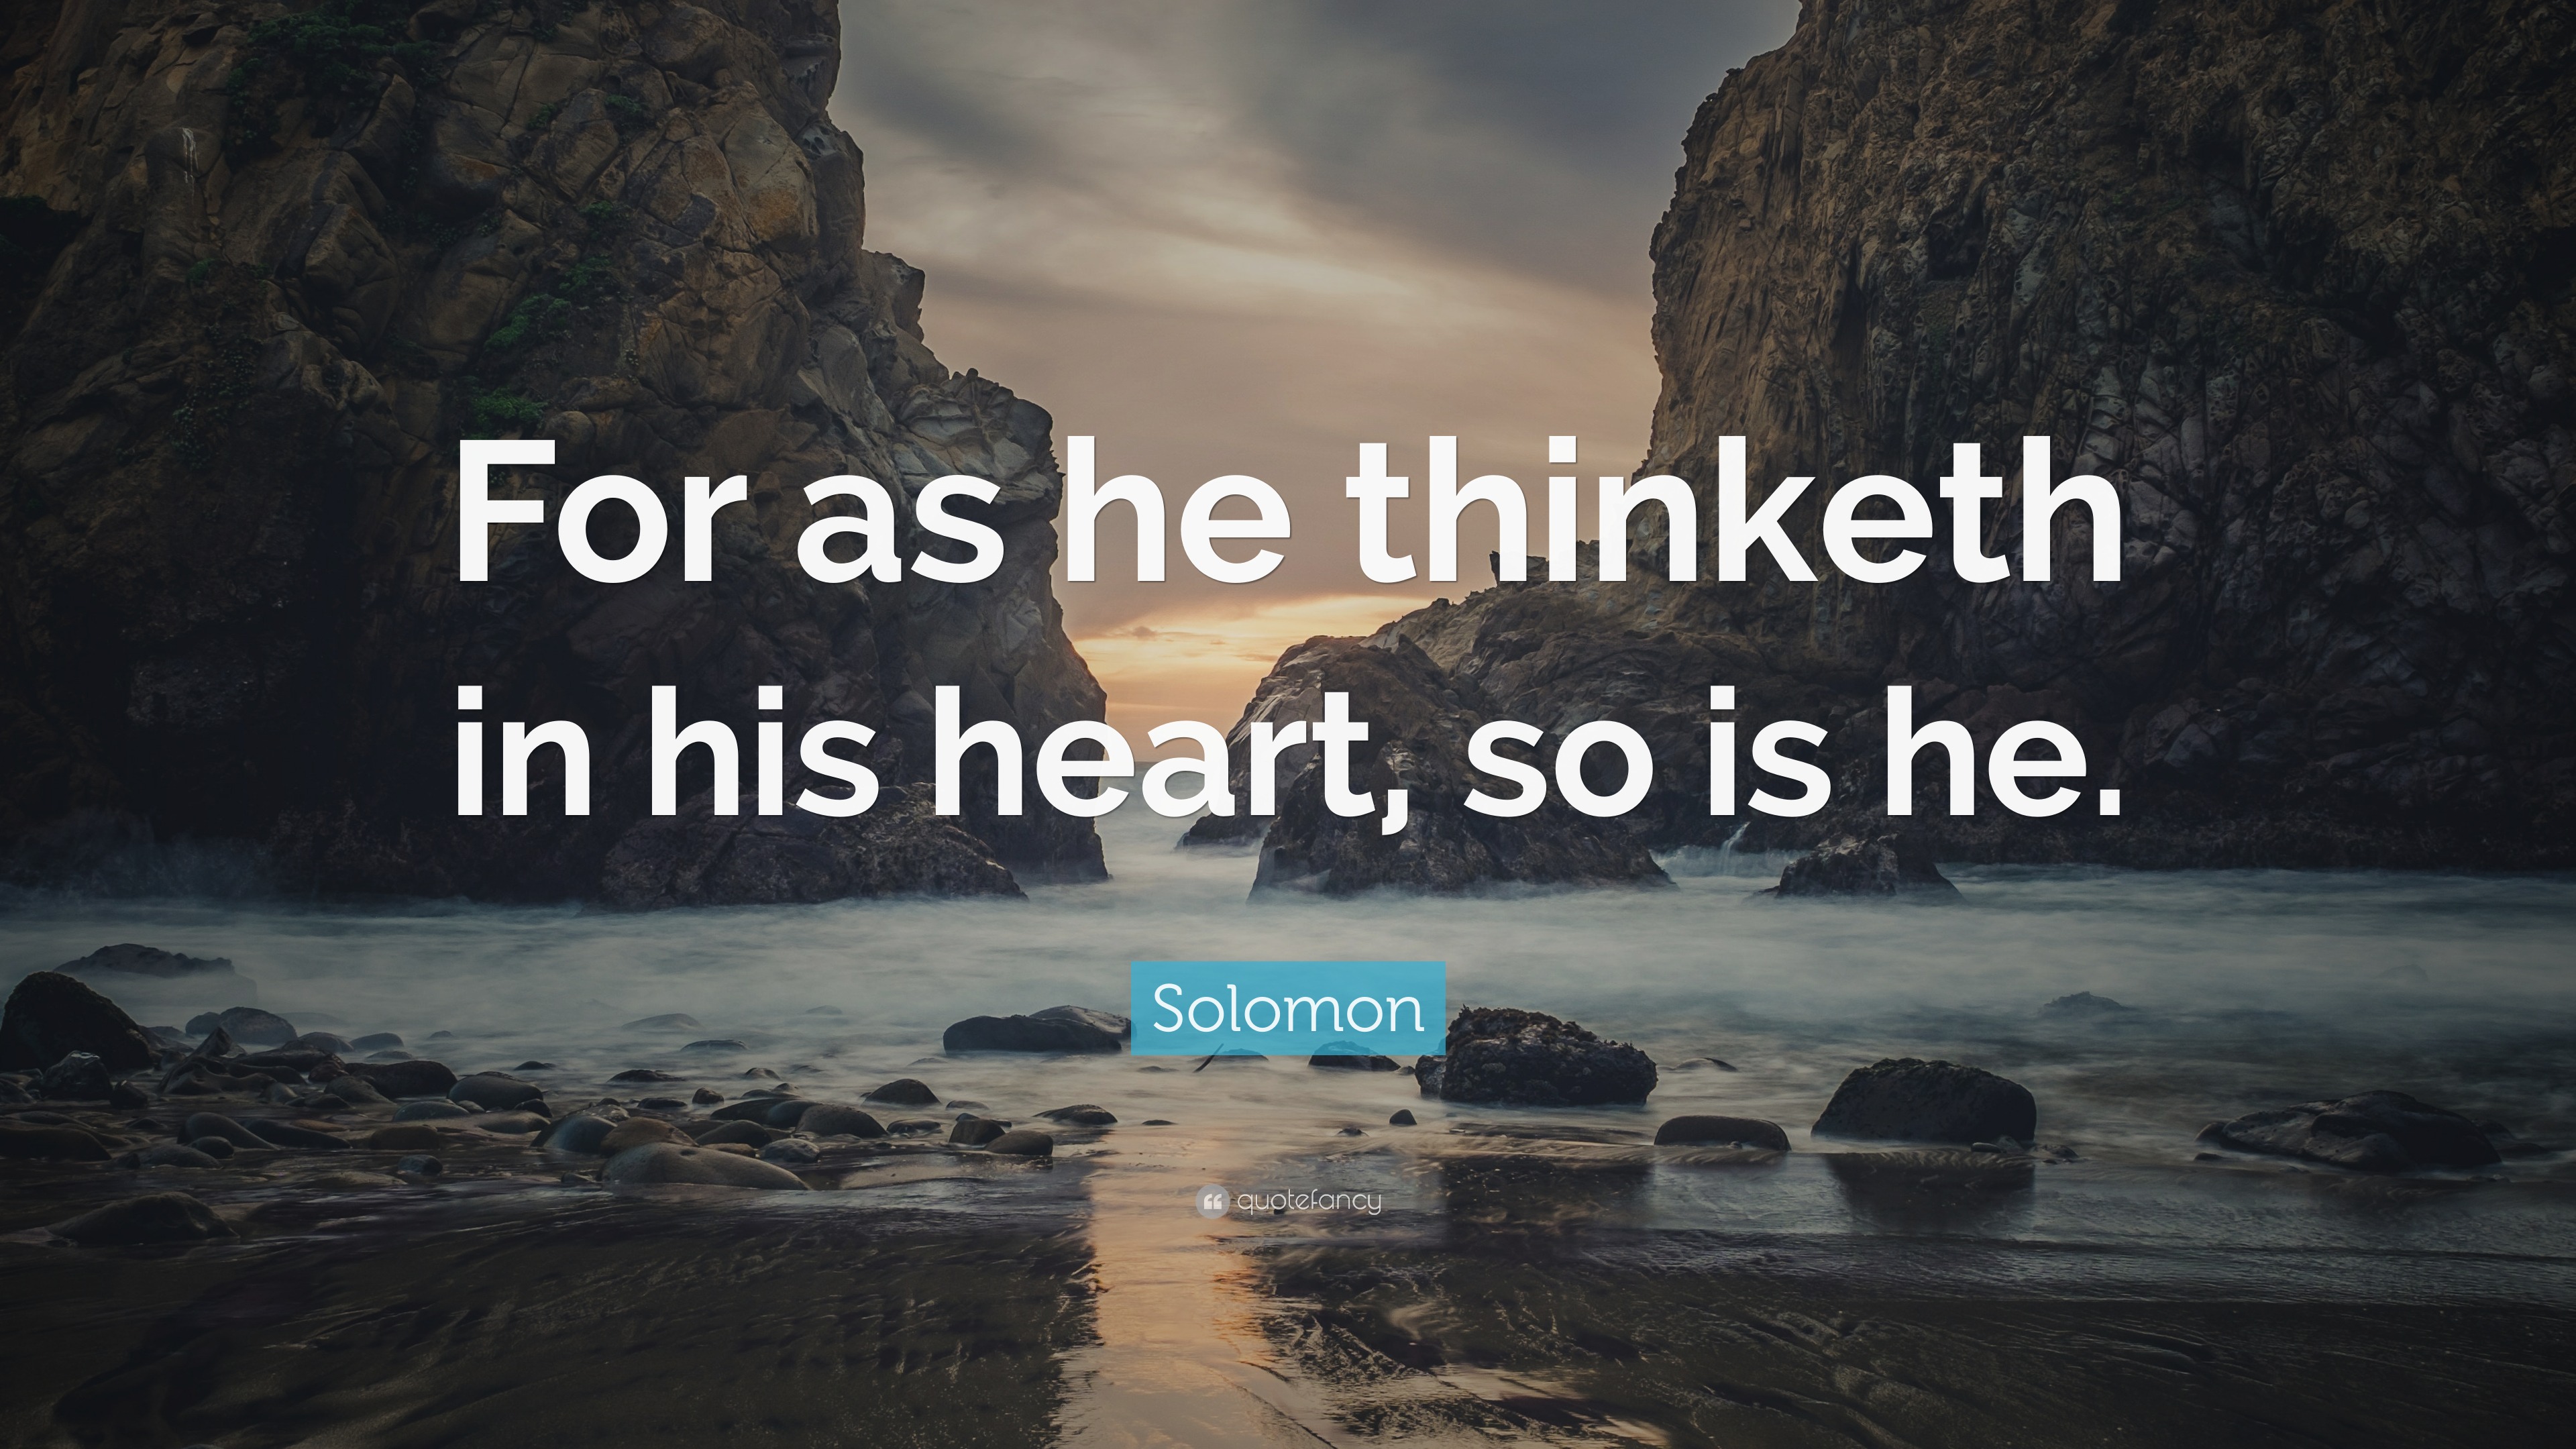 Solomon Quote: “For as he thinketh in his heart, so is he.”